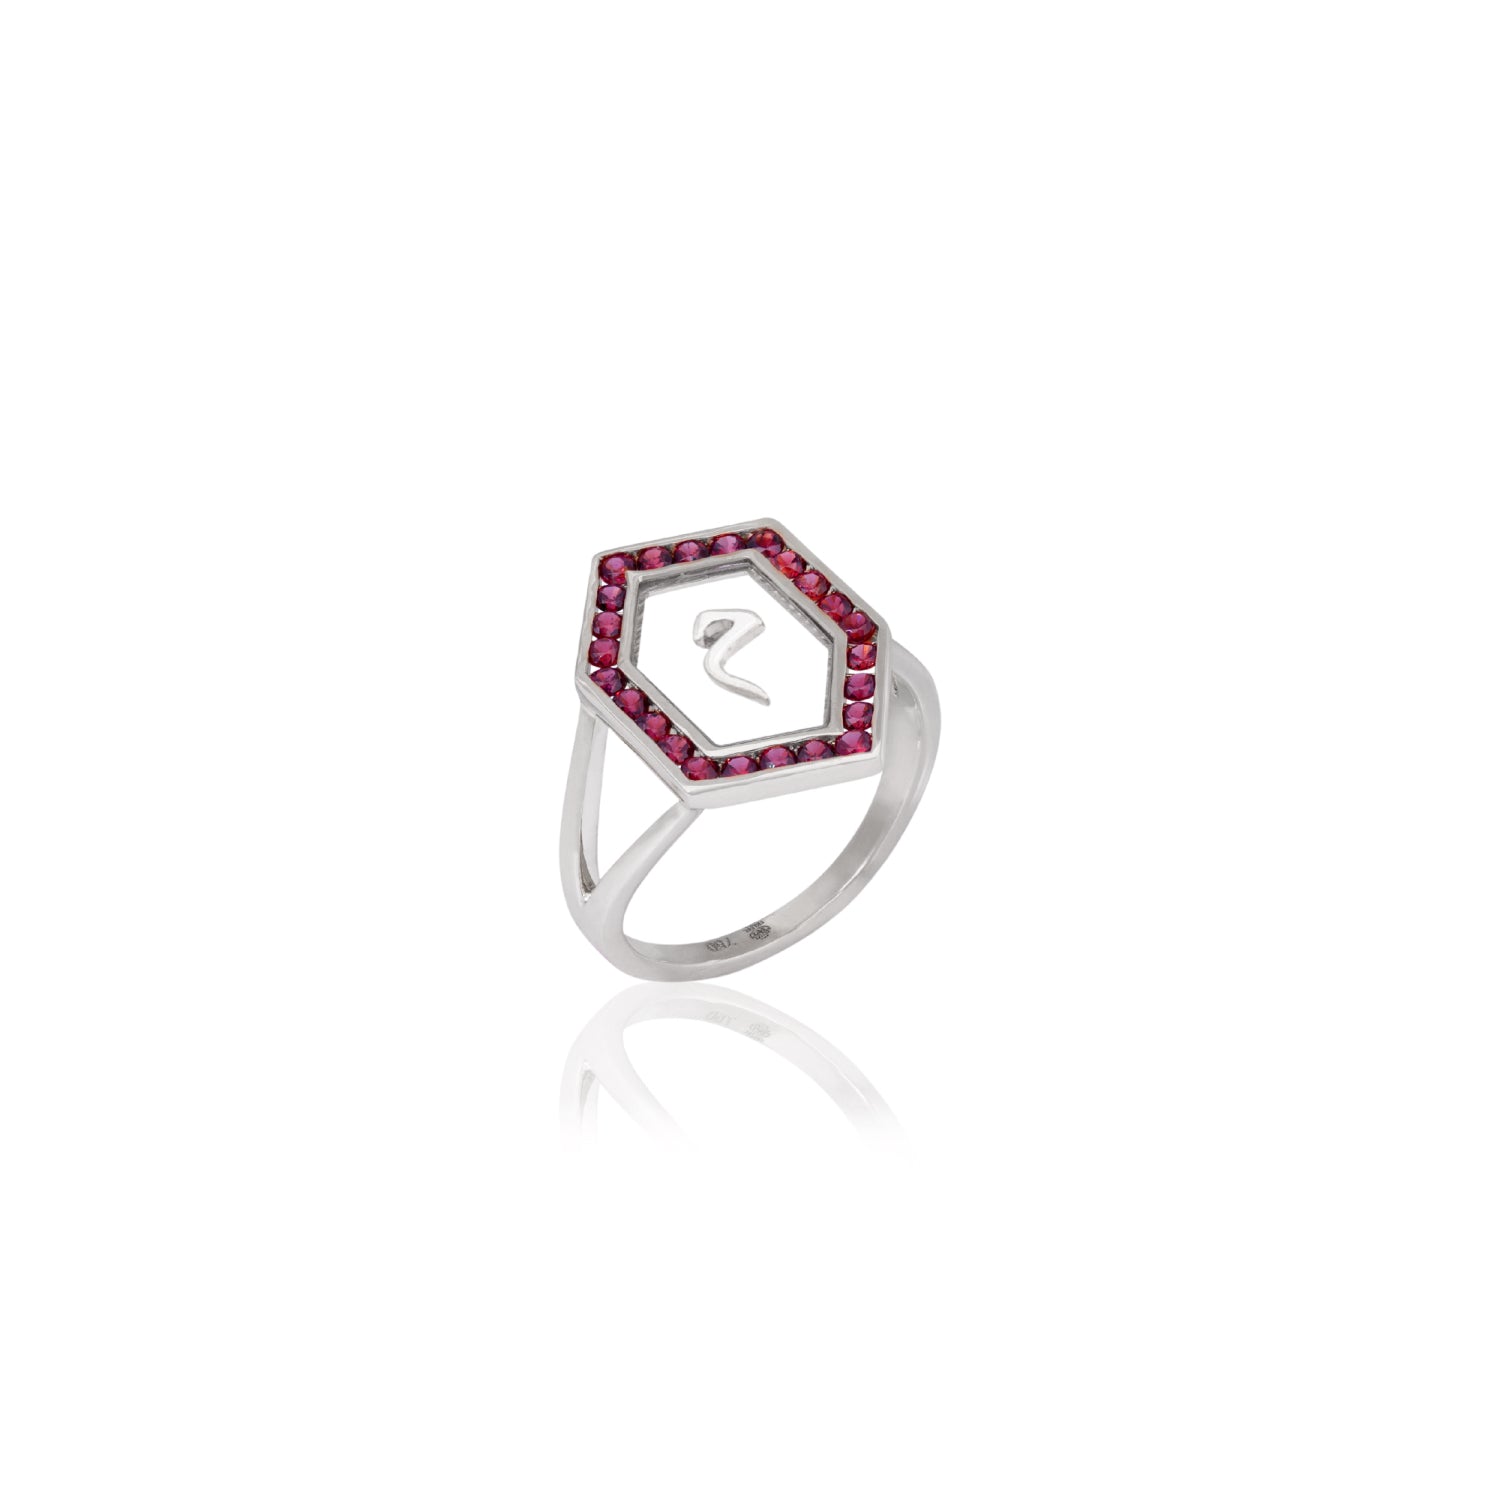 Qamoos 1.0 Letter م Ruby Ring in White Gold